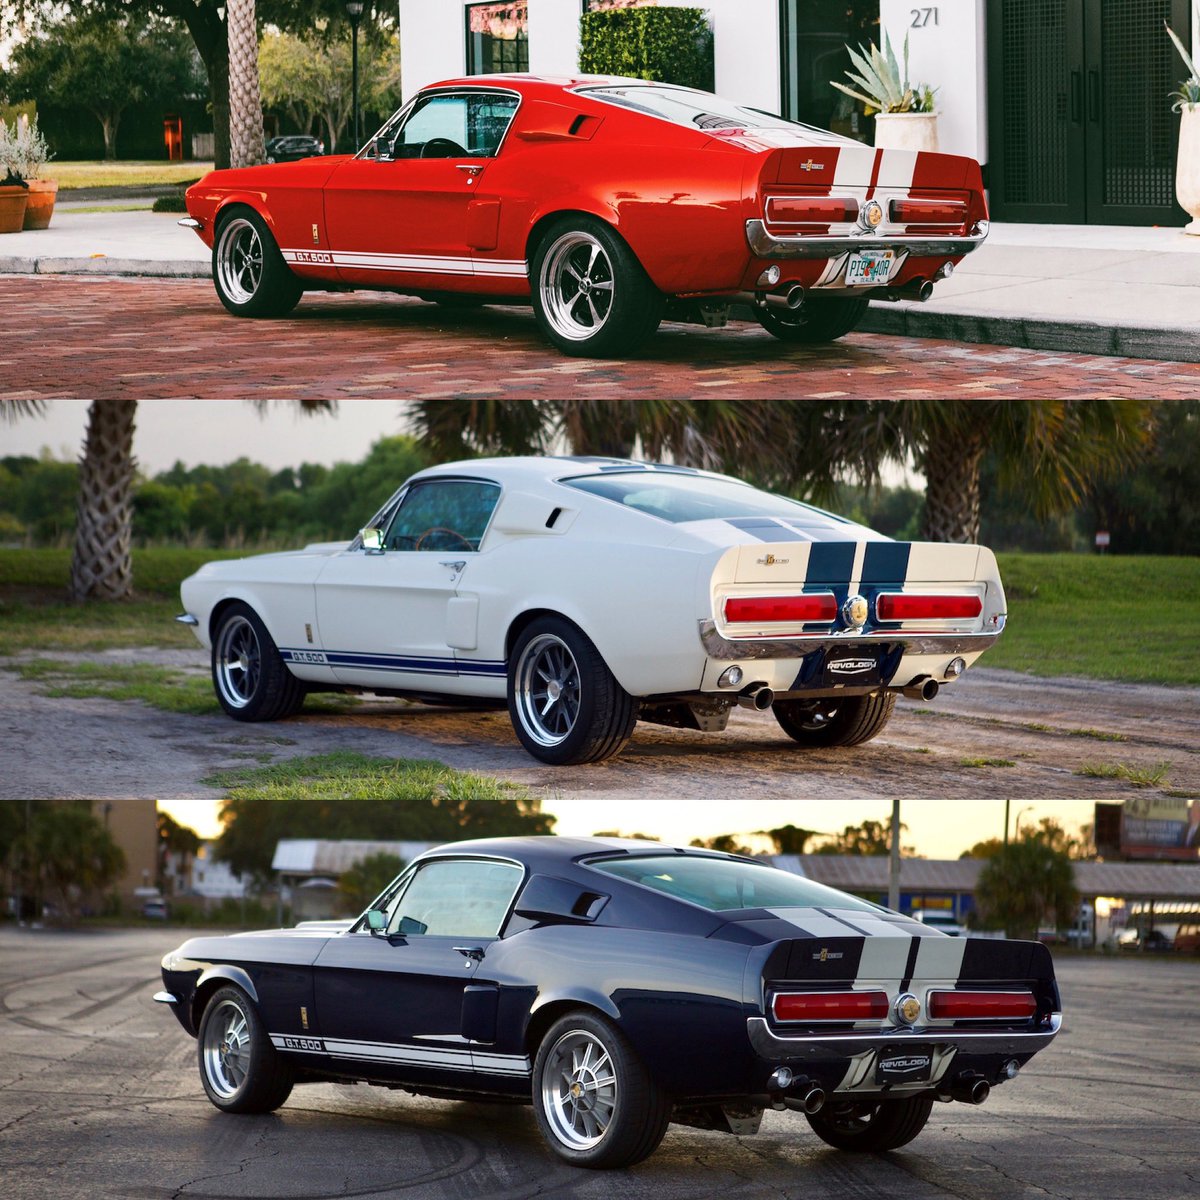 Happy #IndependenceDay from the team at #Revology Cars🇺🇸
 
We don't build them like they used to.
⁡
#revologycars #mustangstory #instagood #ford #mustang #classicmustang #exoticcars #luxurycars #photooftheday #instacars #carsofinstagram #carswithoutlimits #cargram